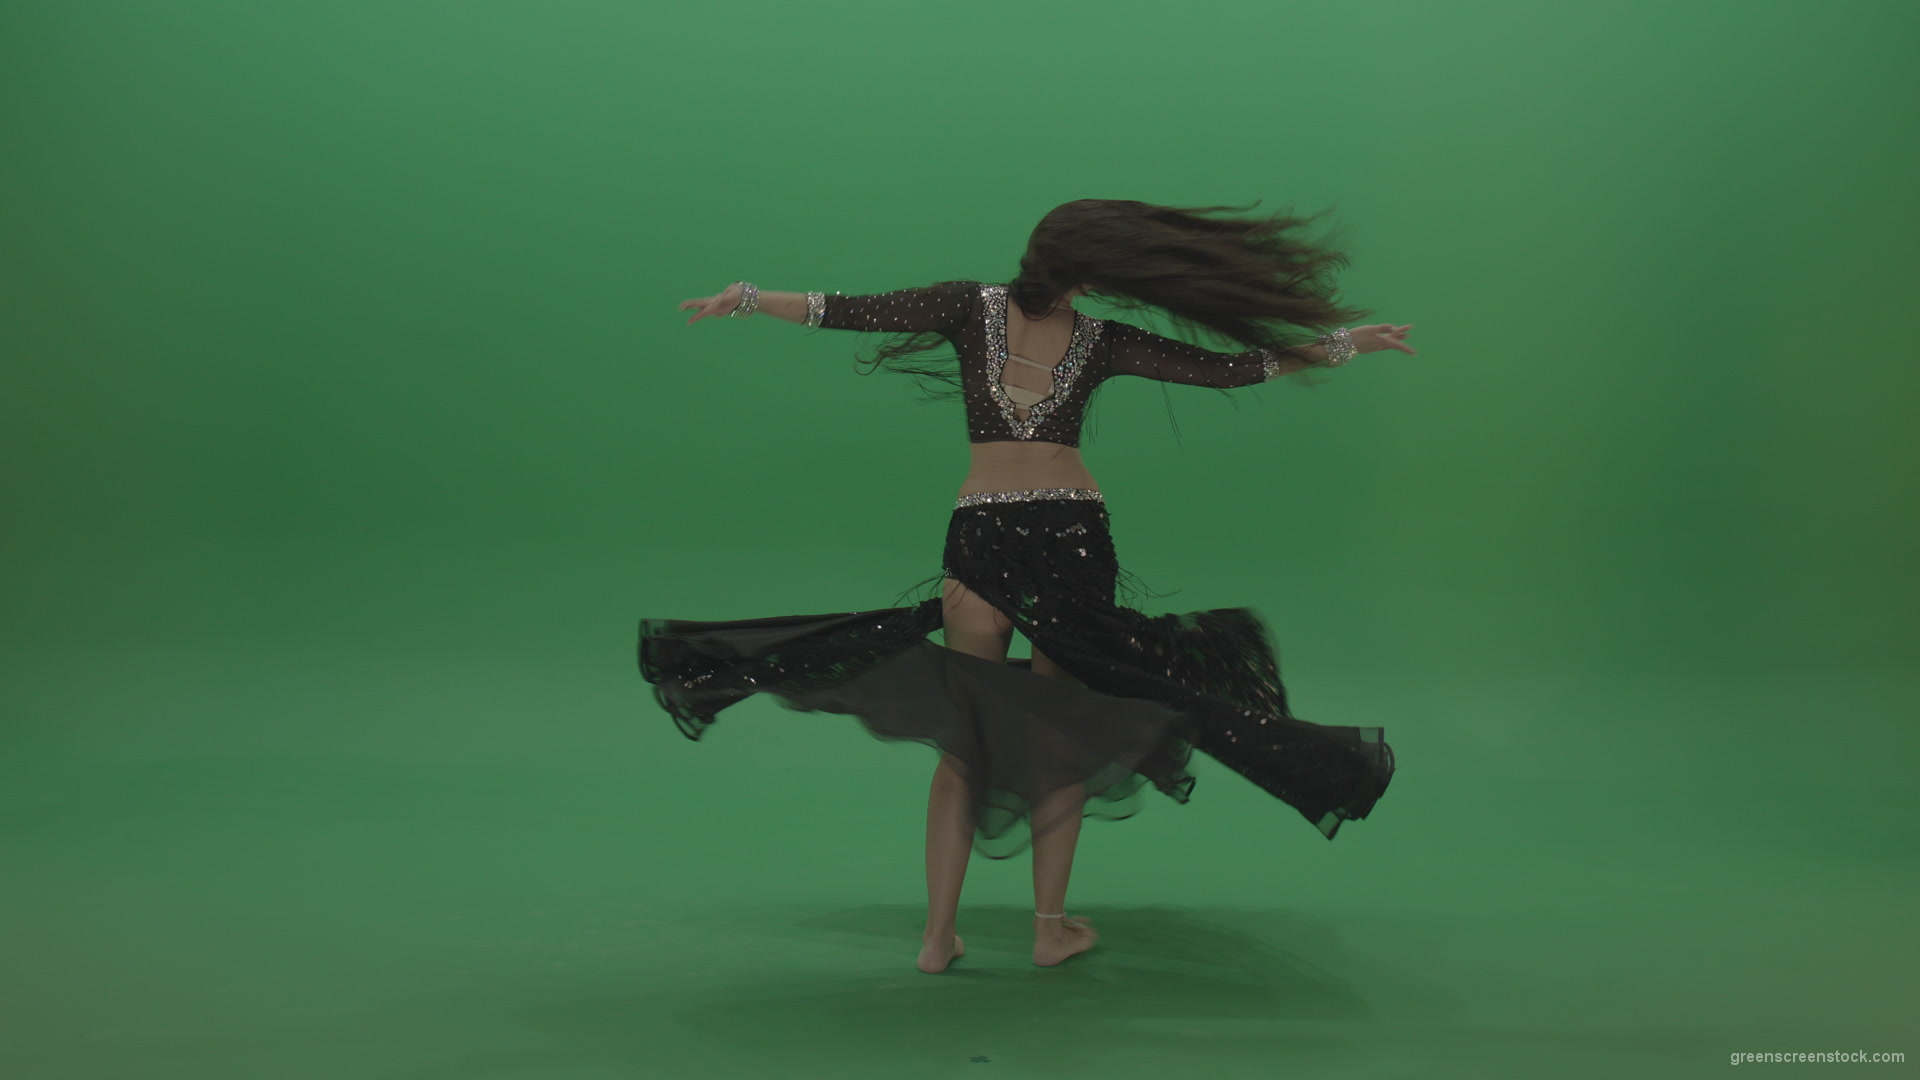 Appealing-belly-dancer-in-black-wear-display-amazing-dance-moves-over-chromakey-background_005 Green Screen Stock